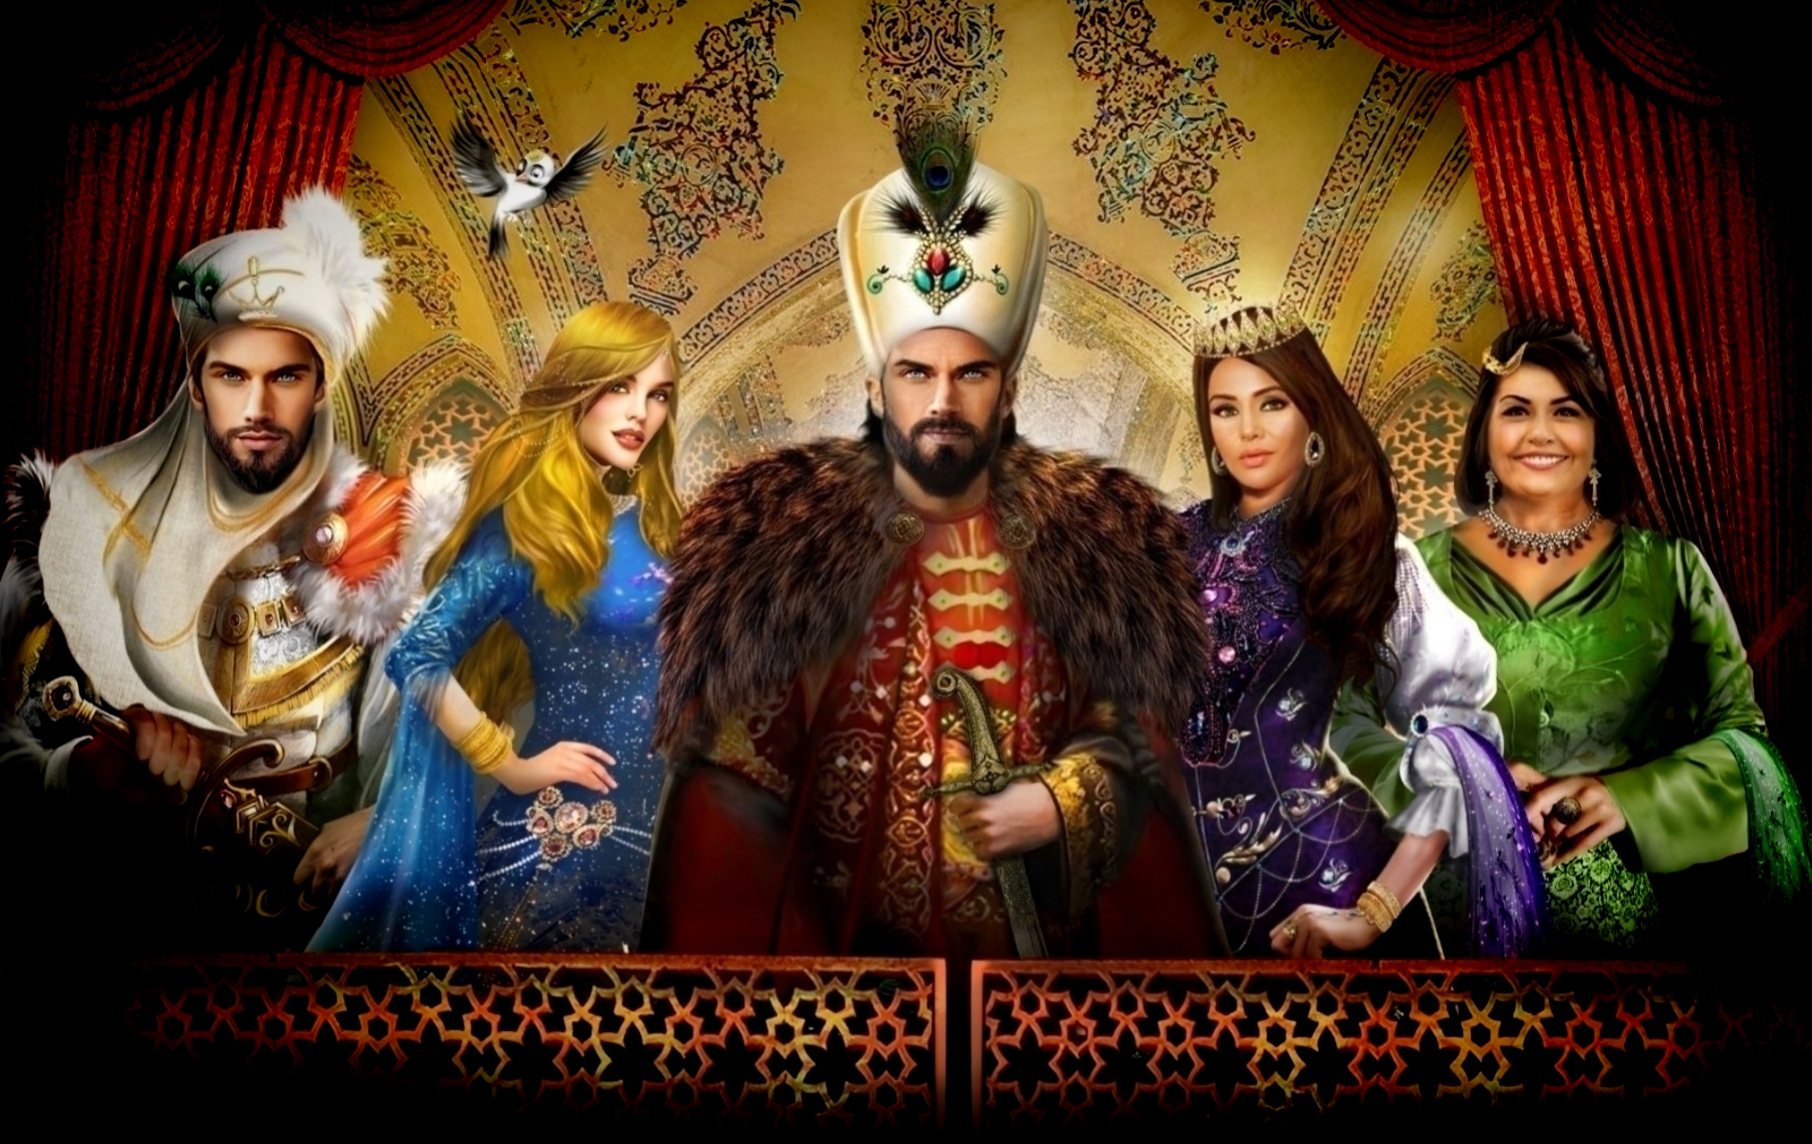 The Sultan the Prince and Sabina - In the world of Prince Ercan and Sabina there is no greater power than love .